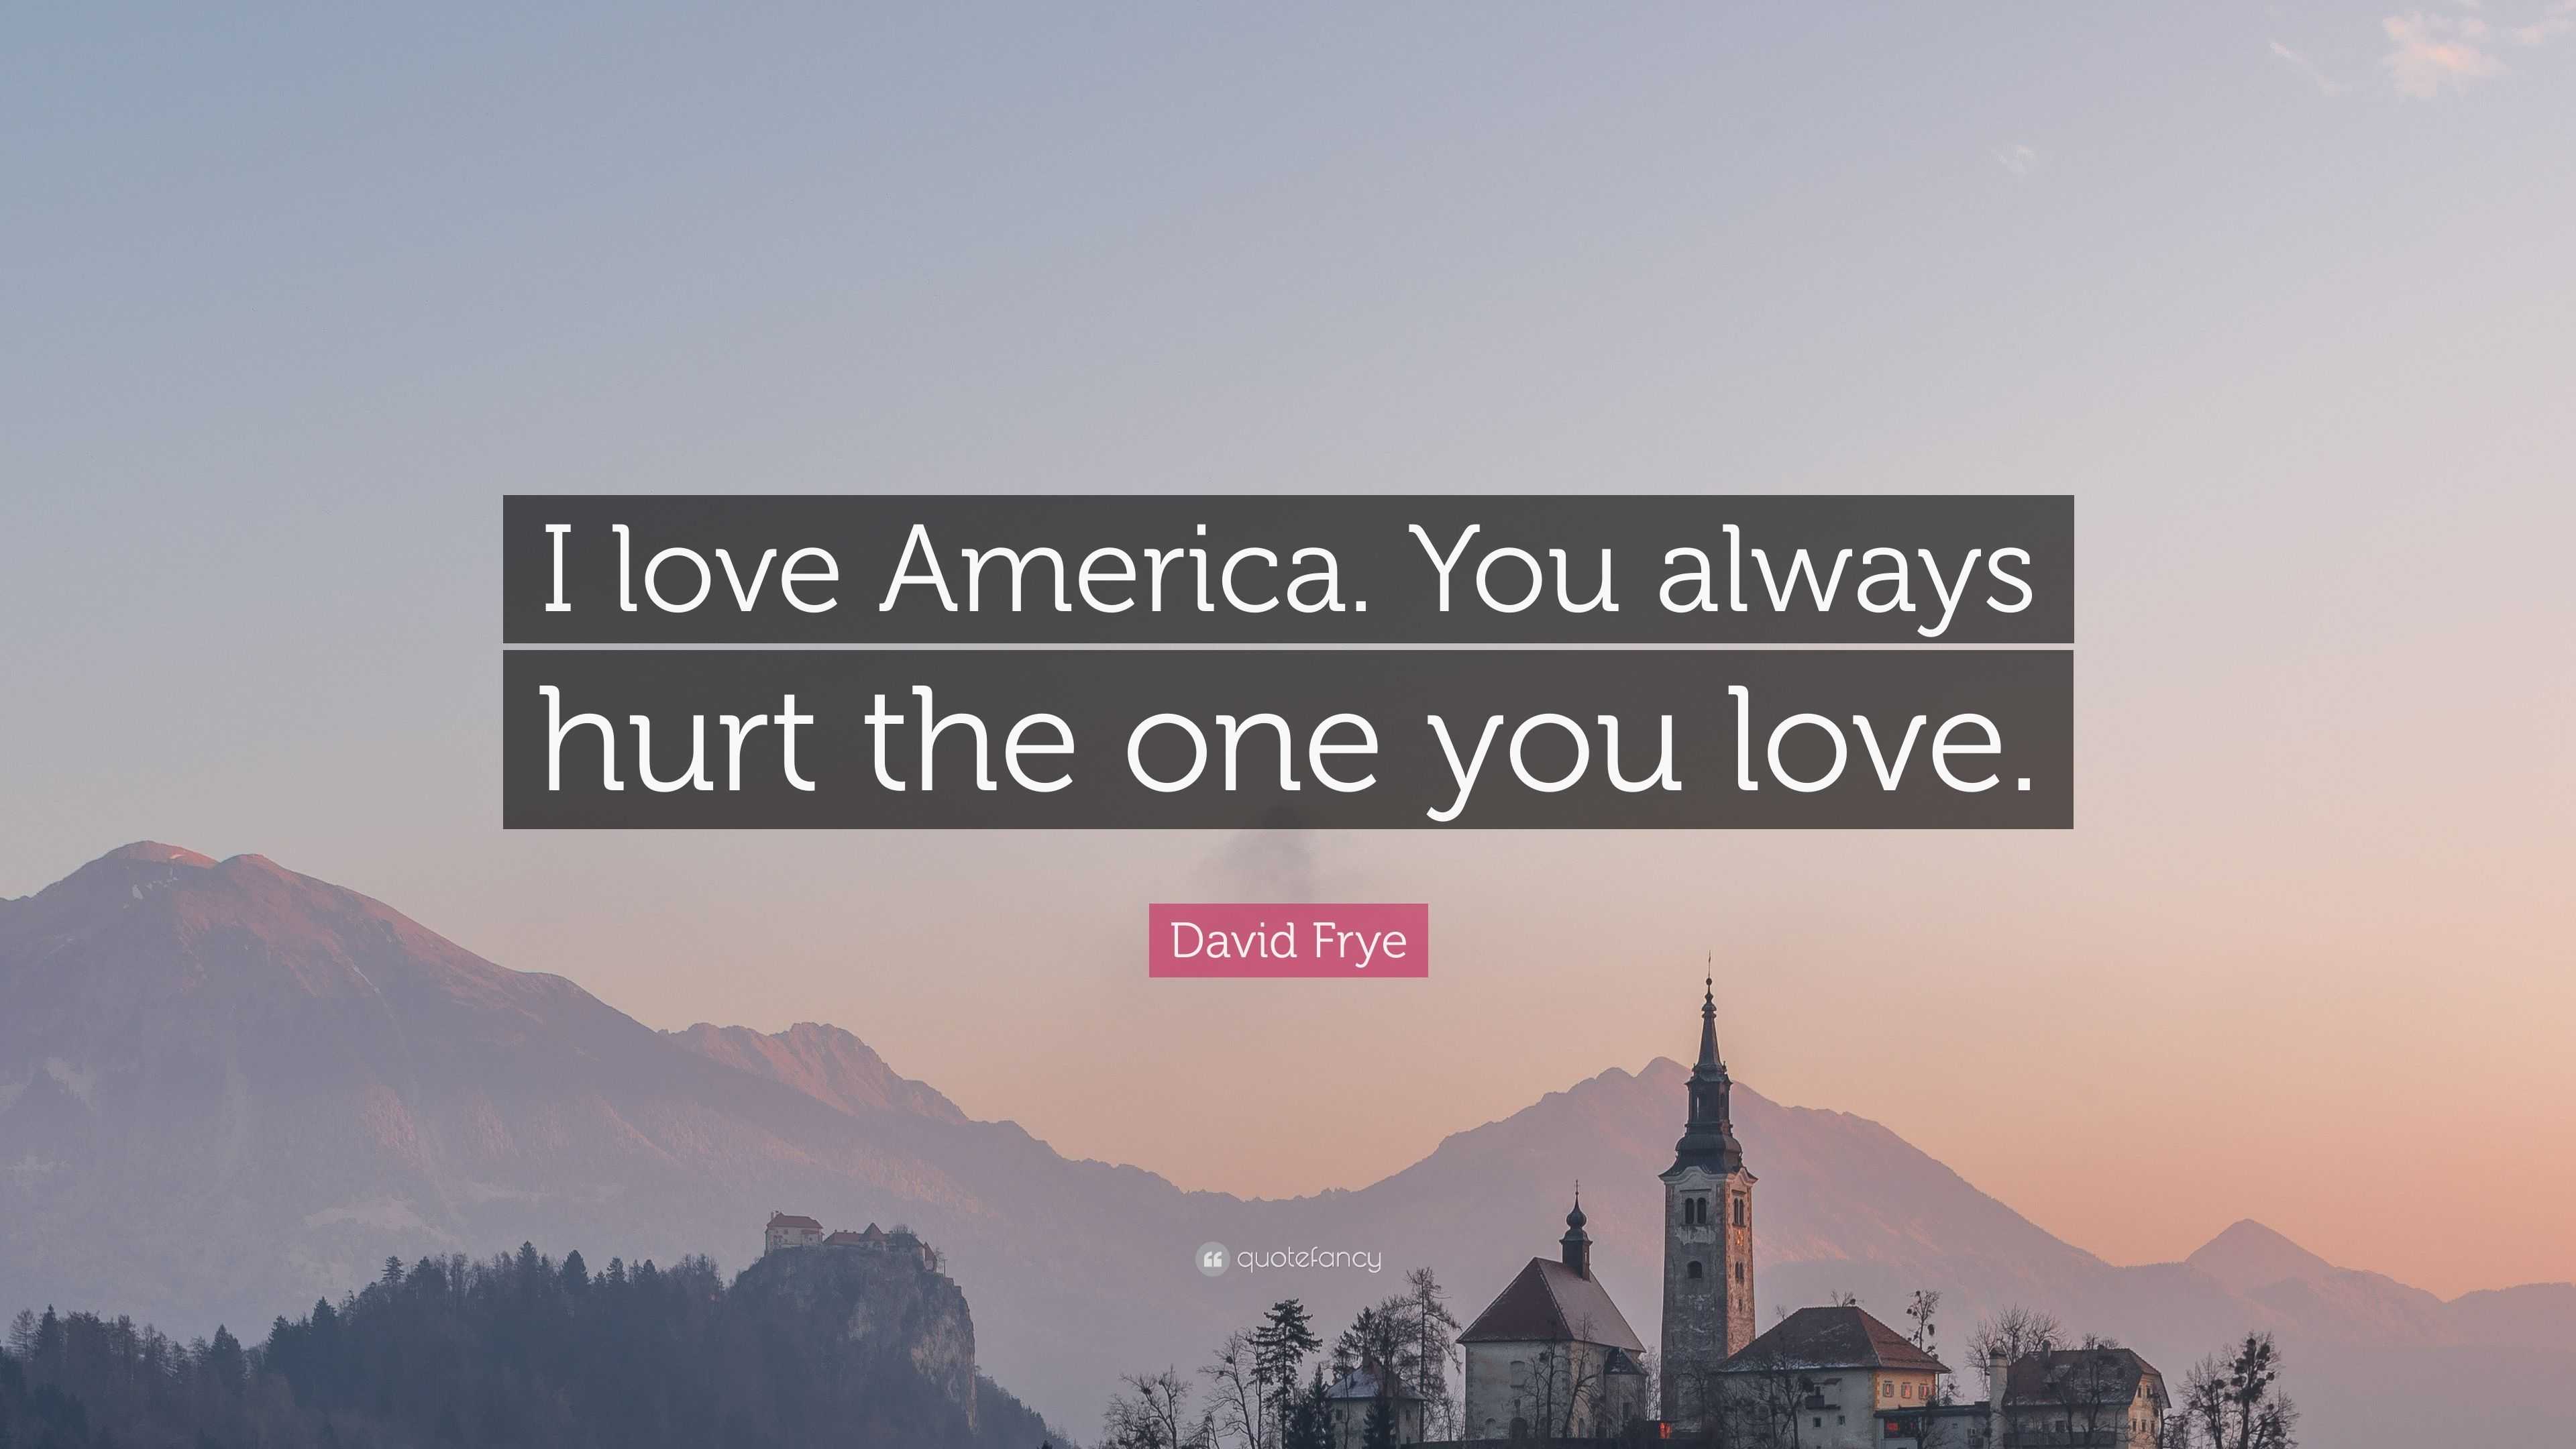 David Frye Quote “I love America You always hurt the one you love